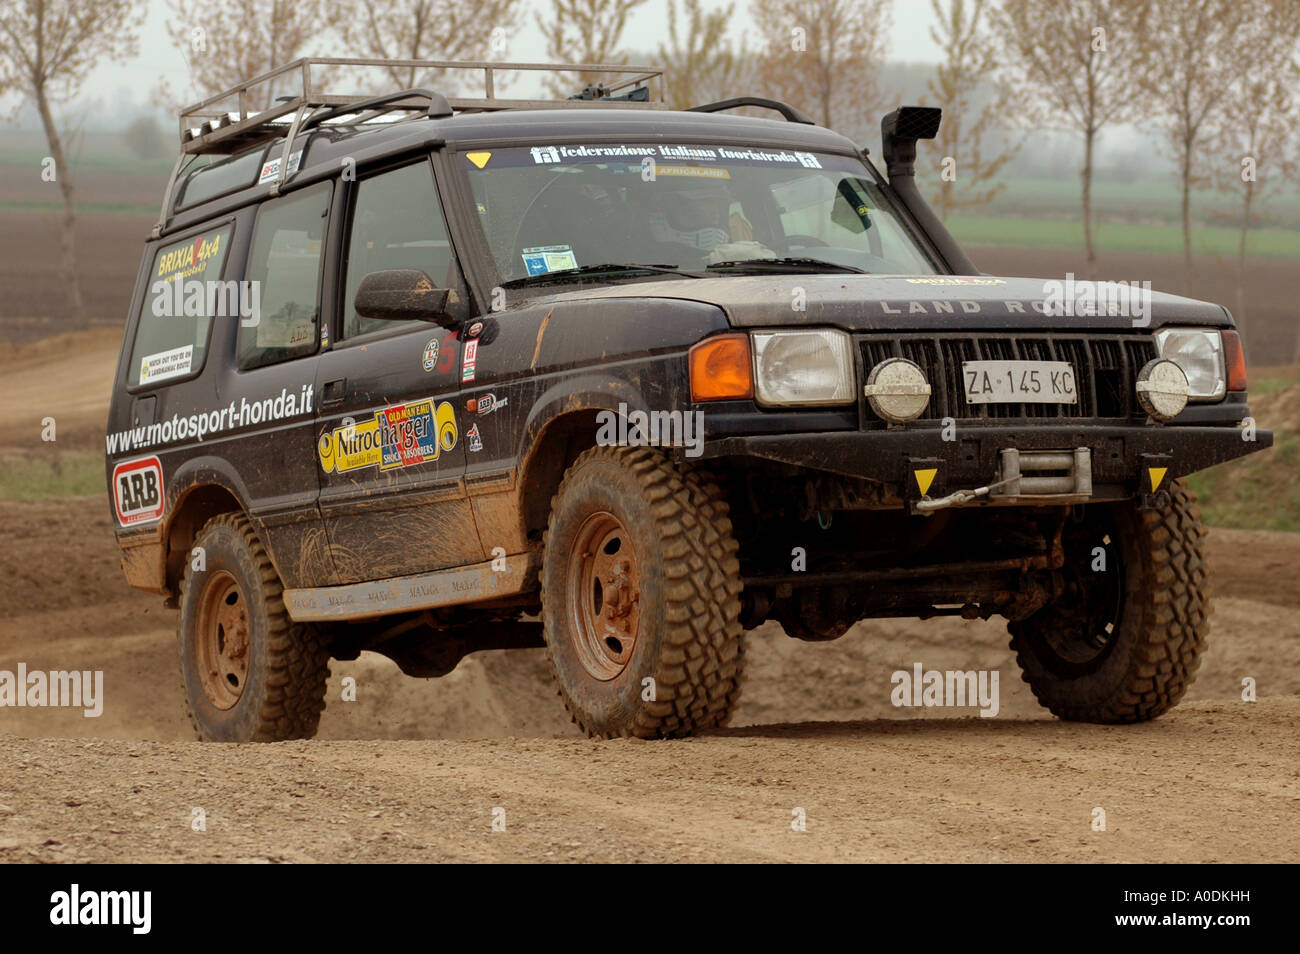 landrover discovery serious offroader Stock Photo